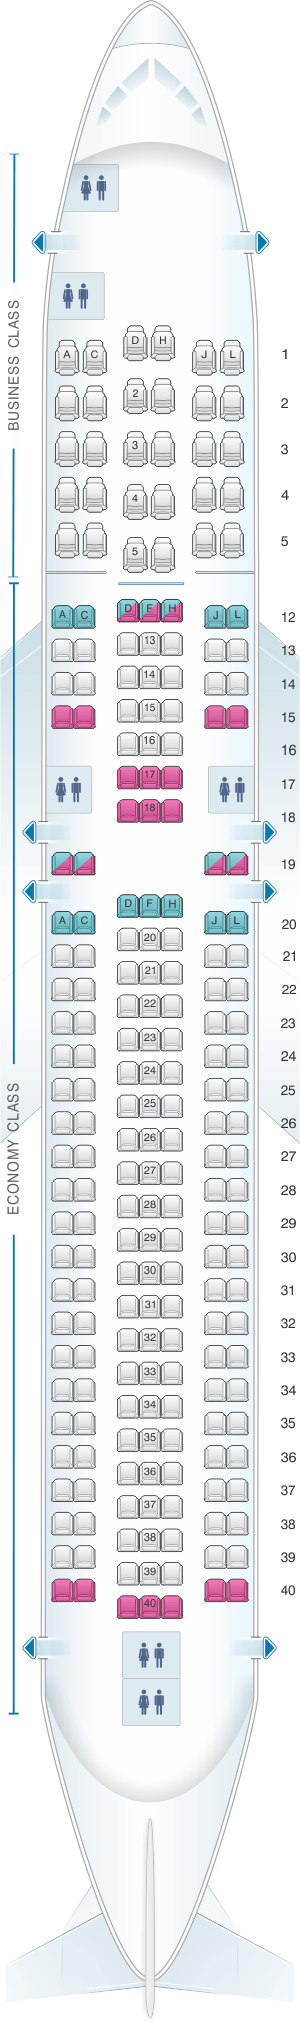 boeing 737 800 seating chart